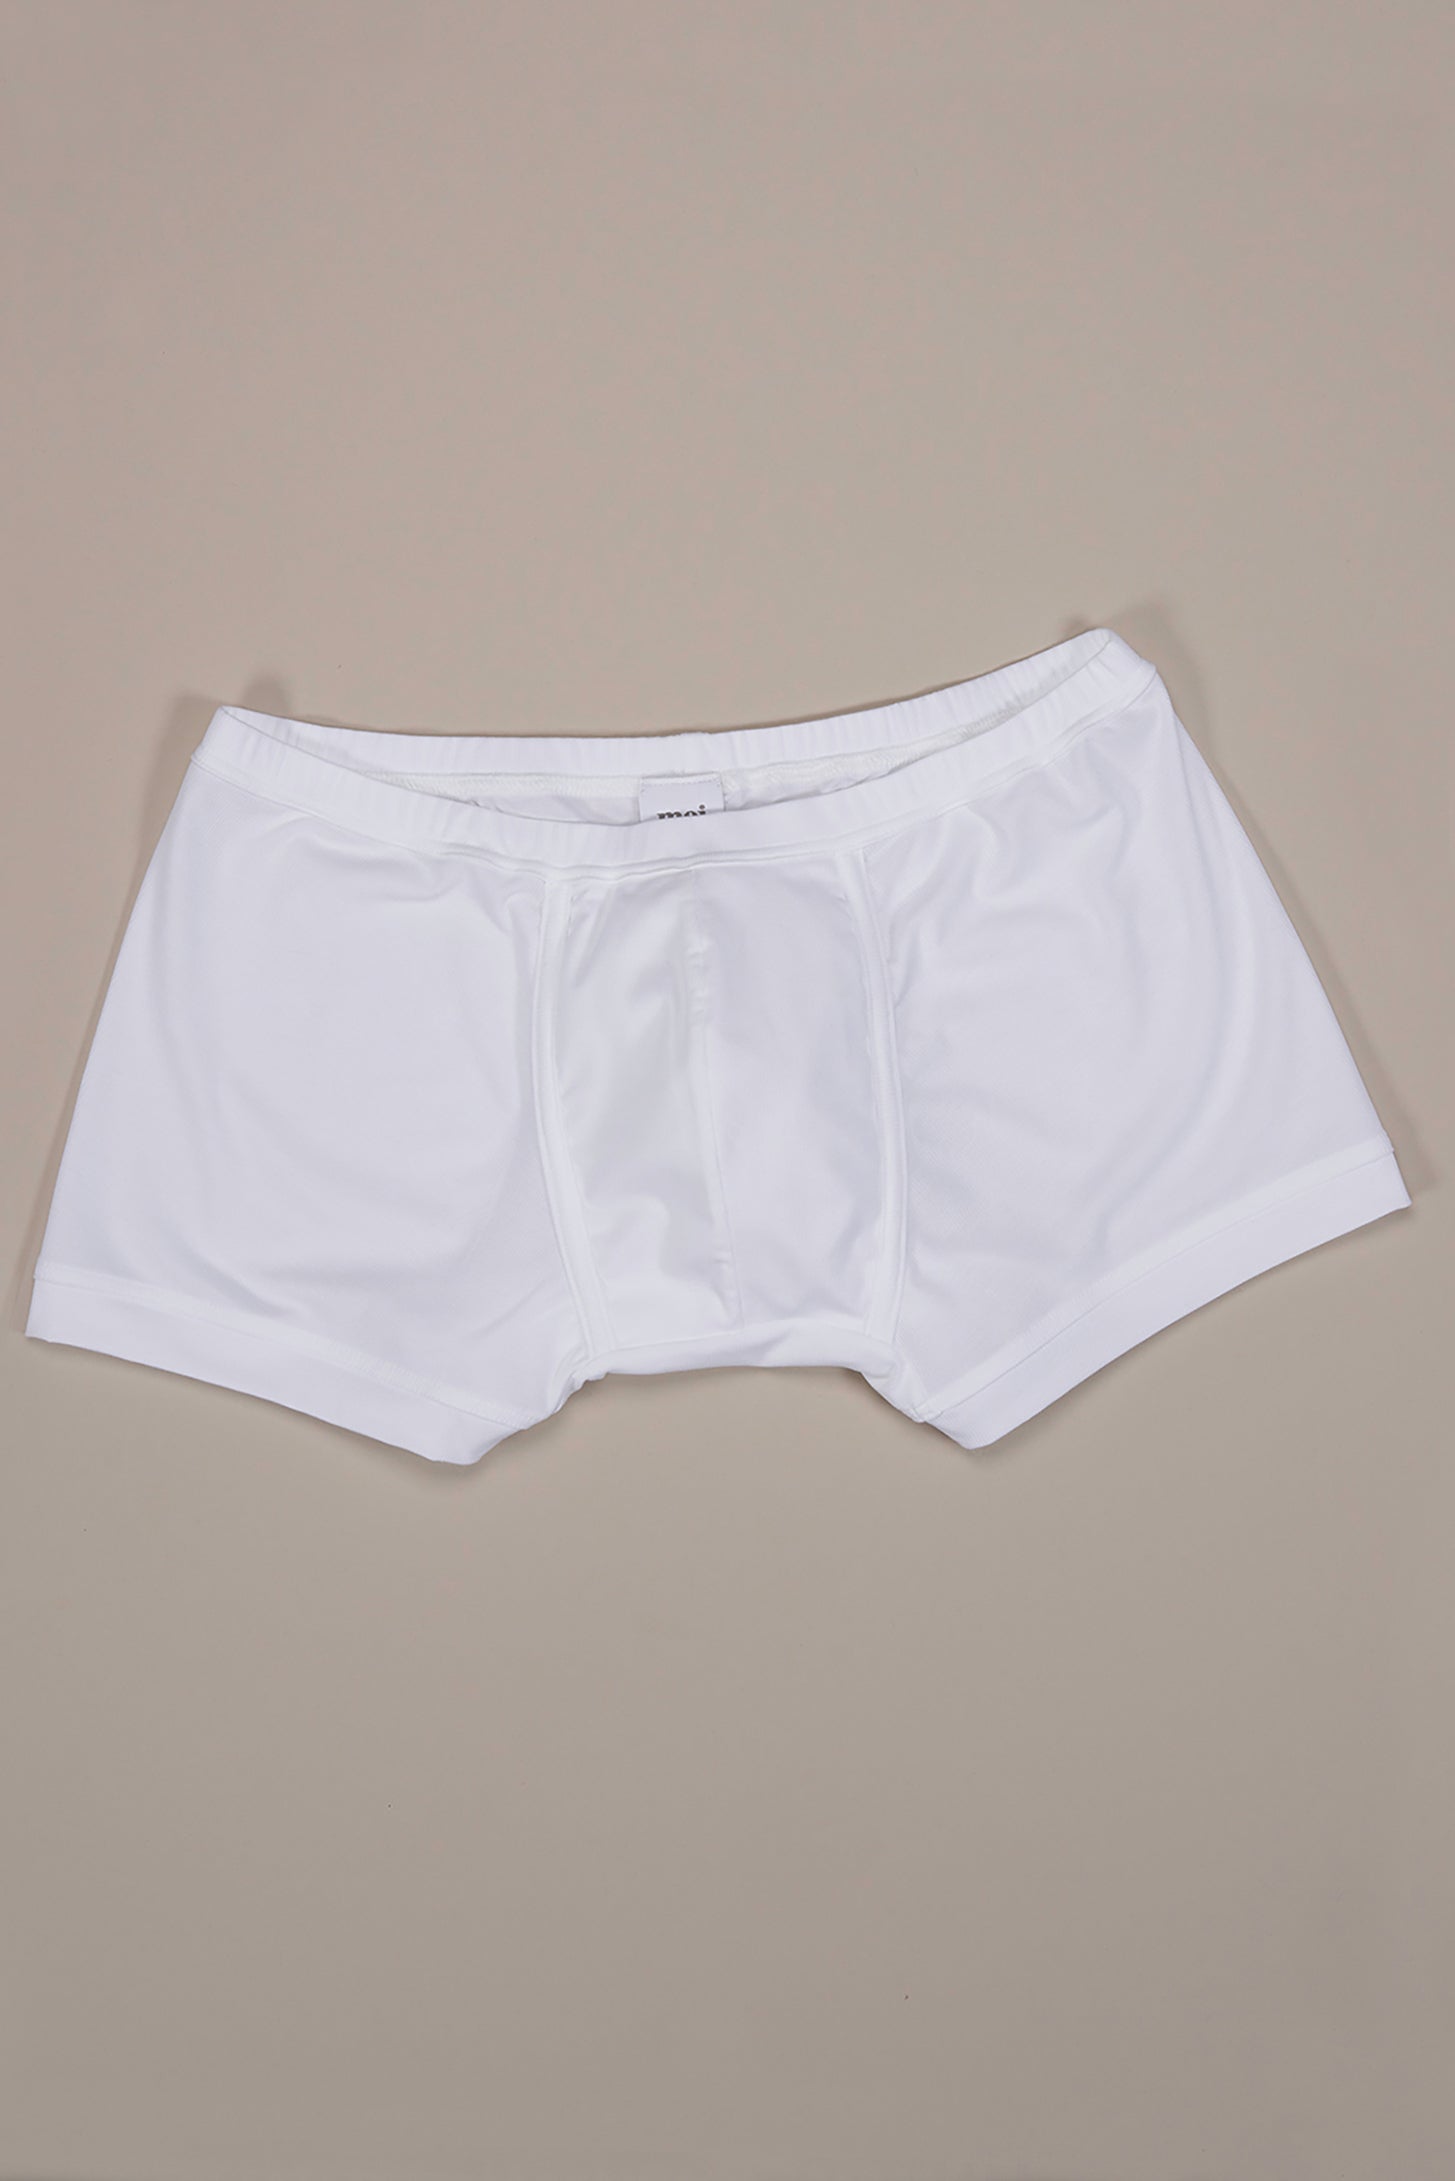 comfortable, organic, gentlemanly boxerbrief  